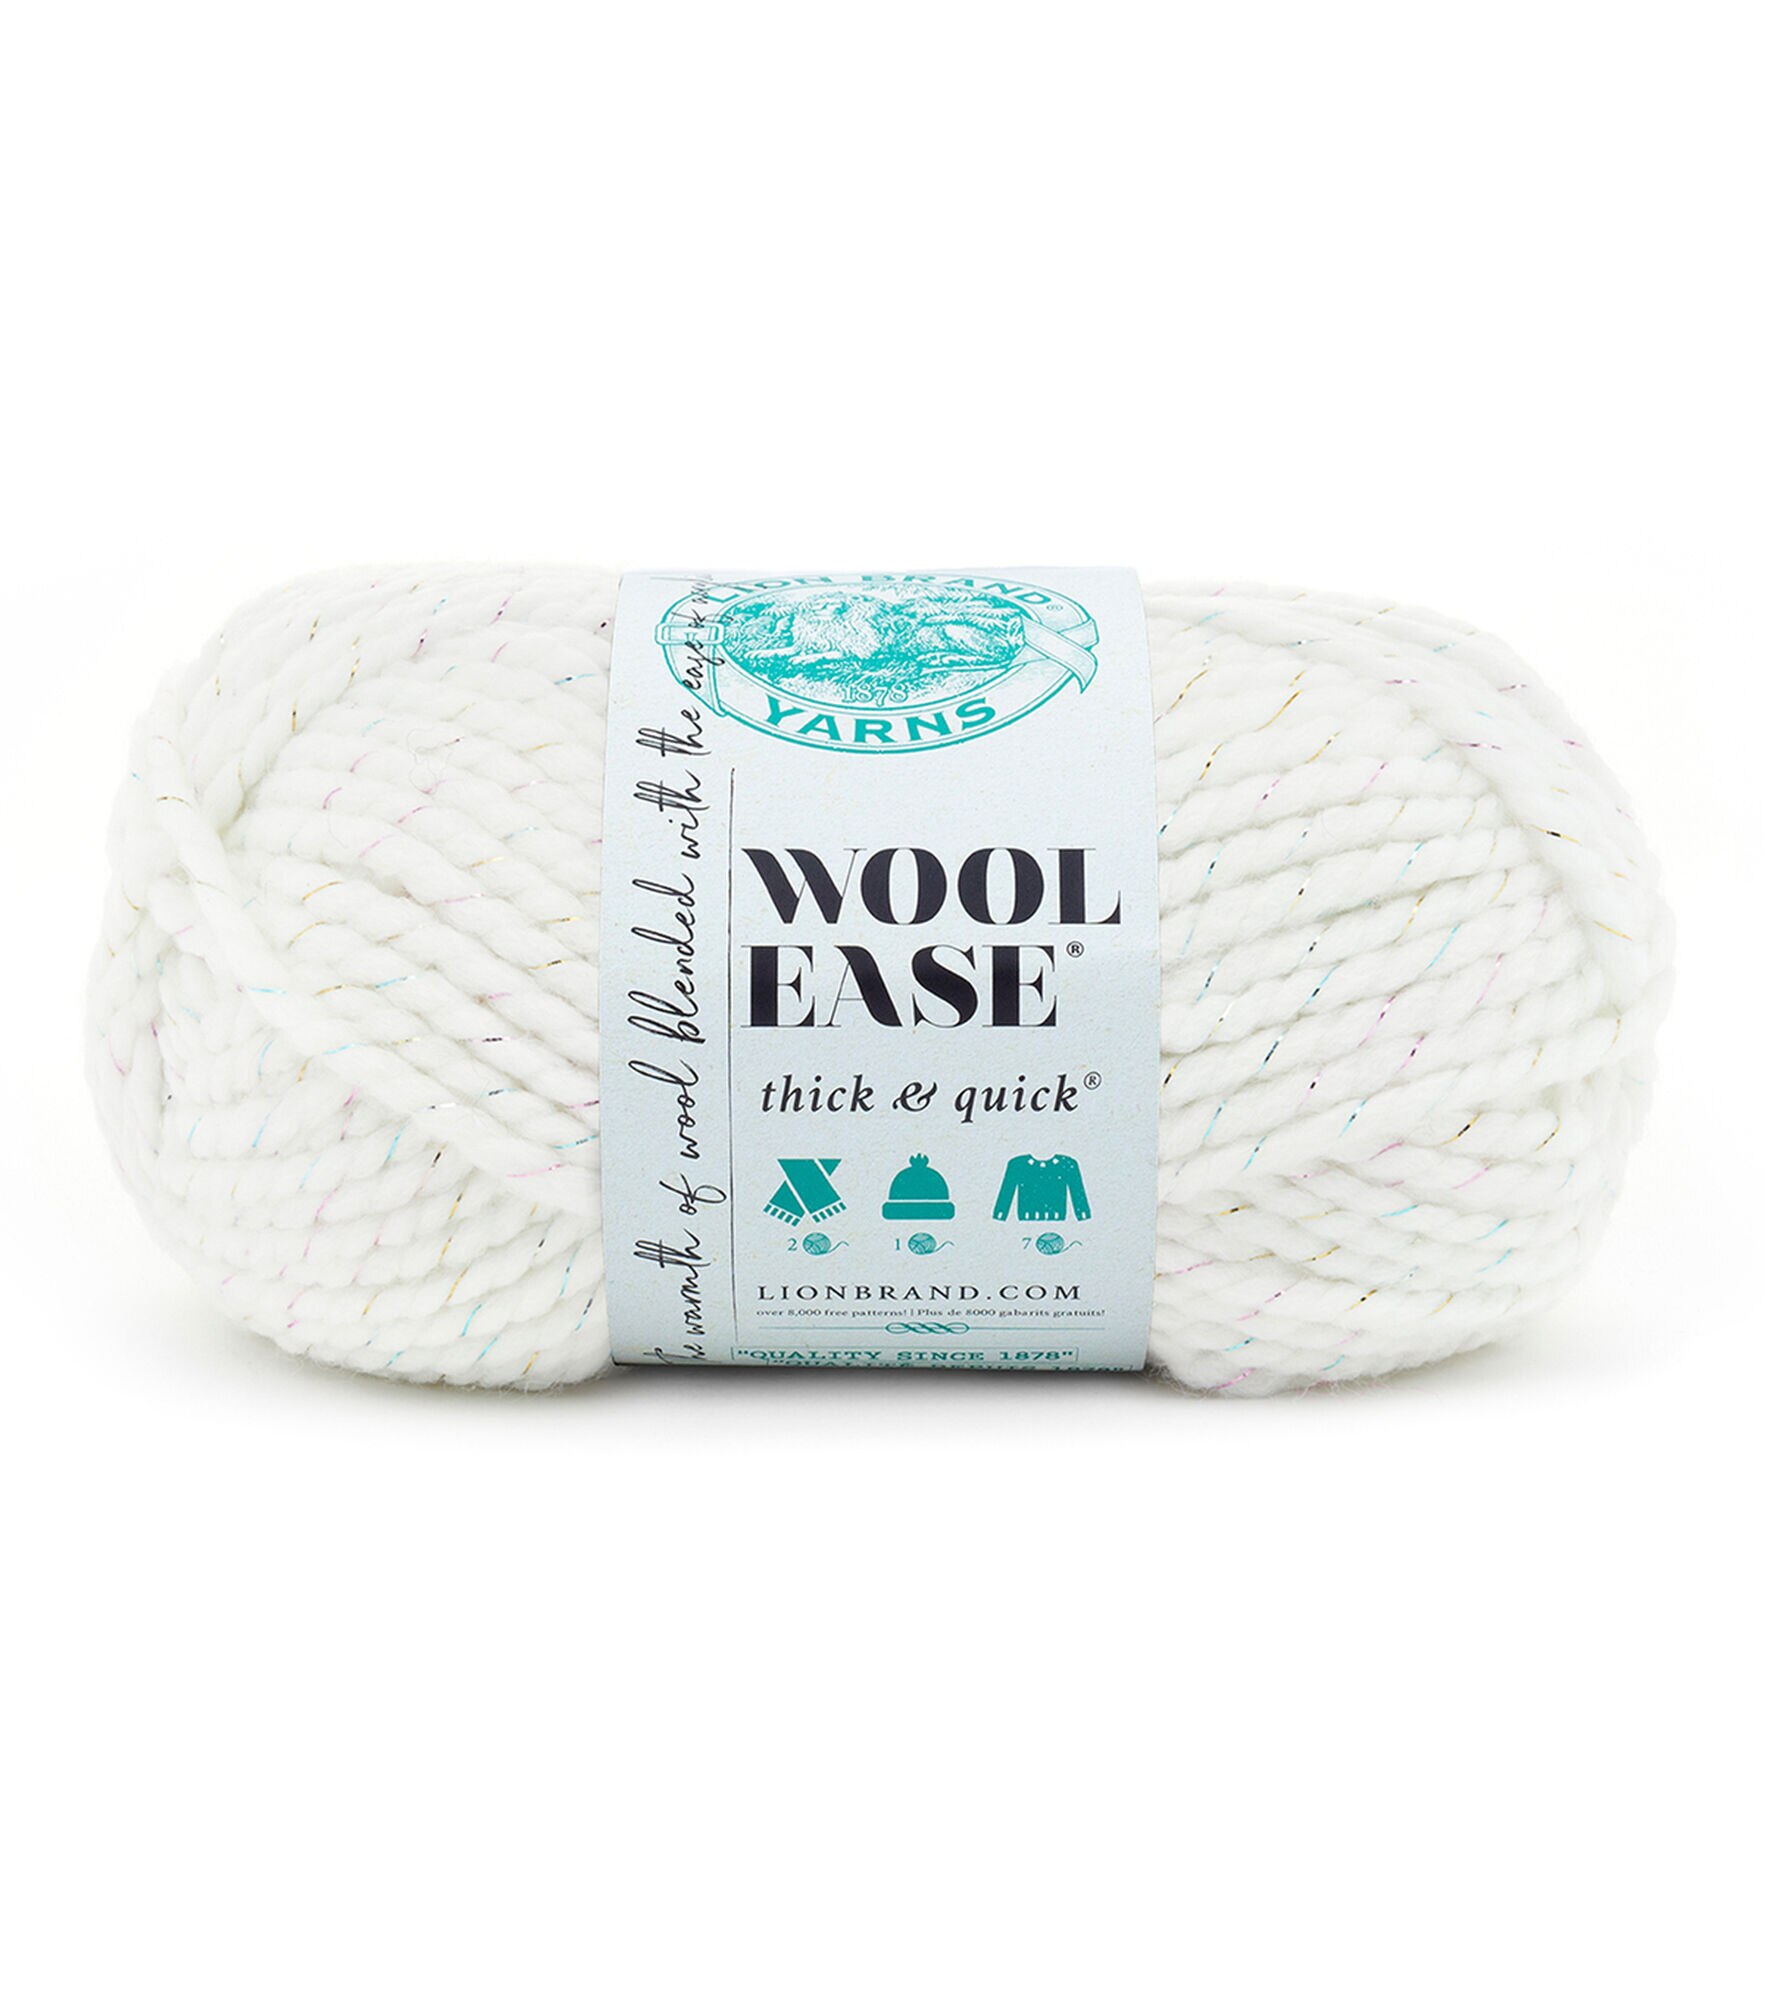 Lion Brand Wool-Ease Thick & Quick Yarn-Crimson Stripes, 1 count